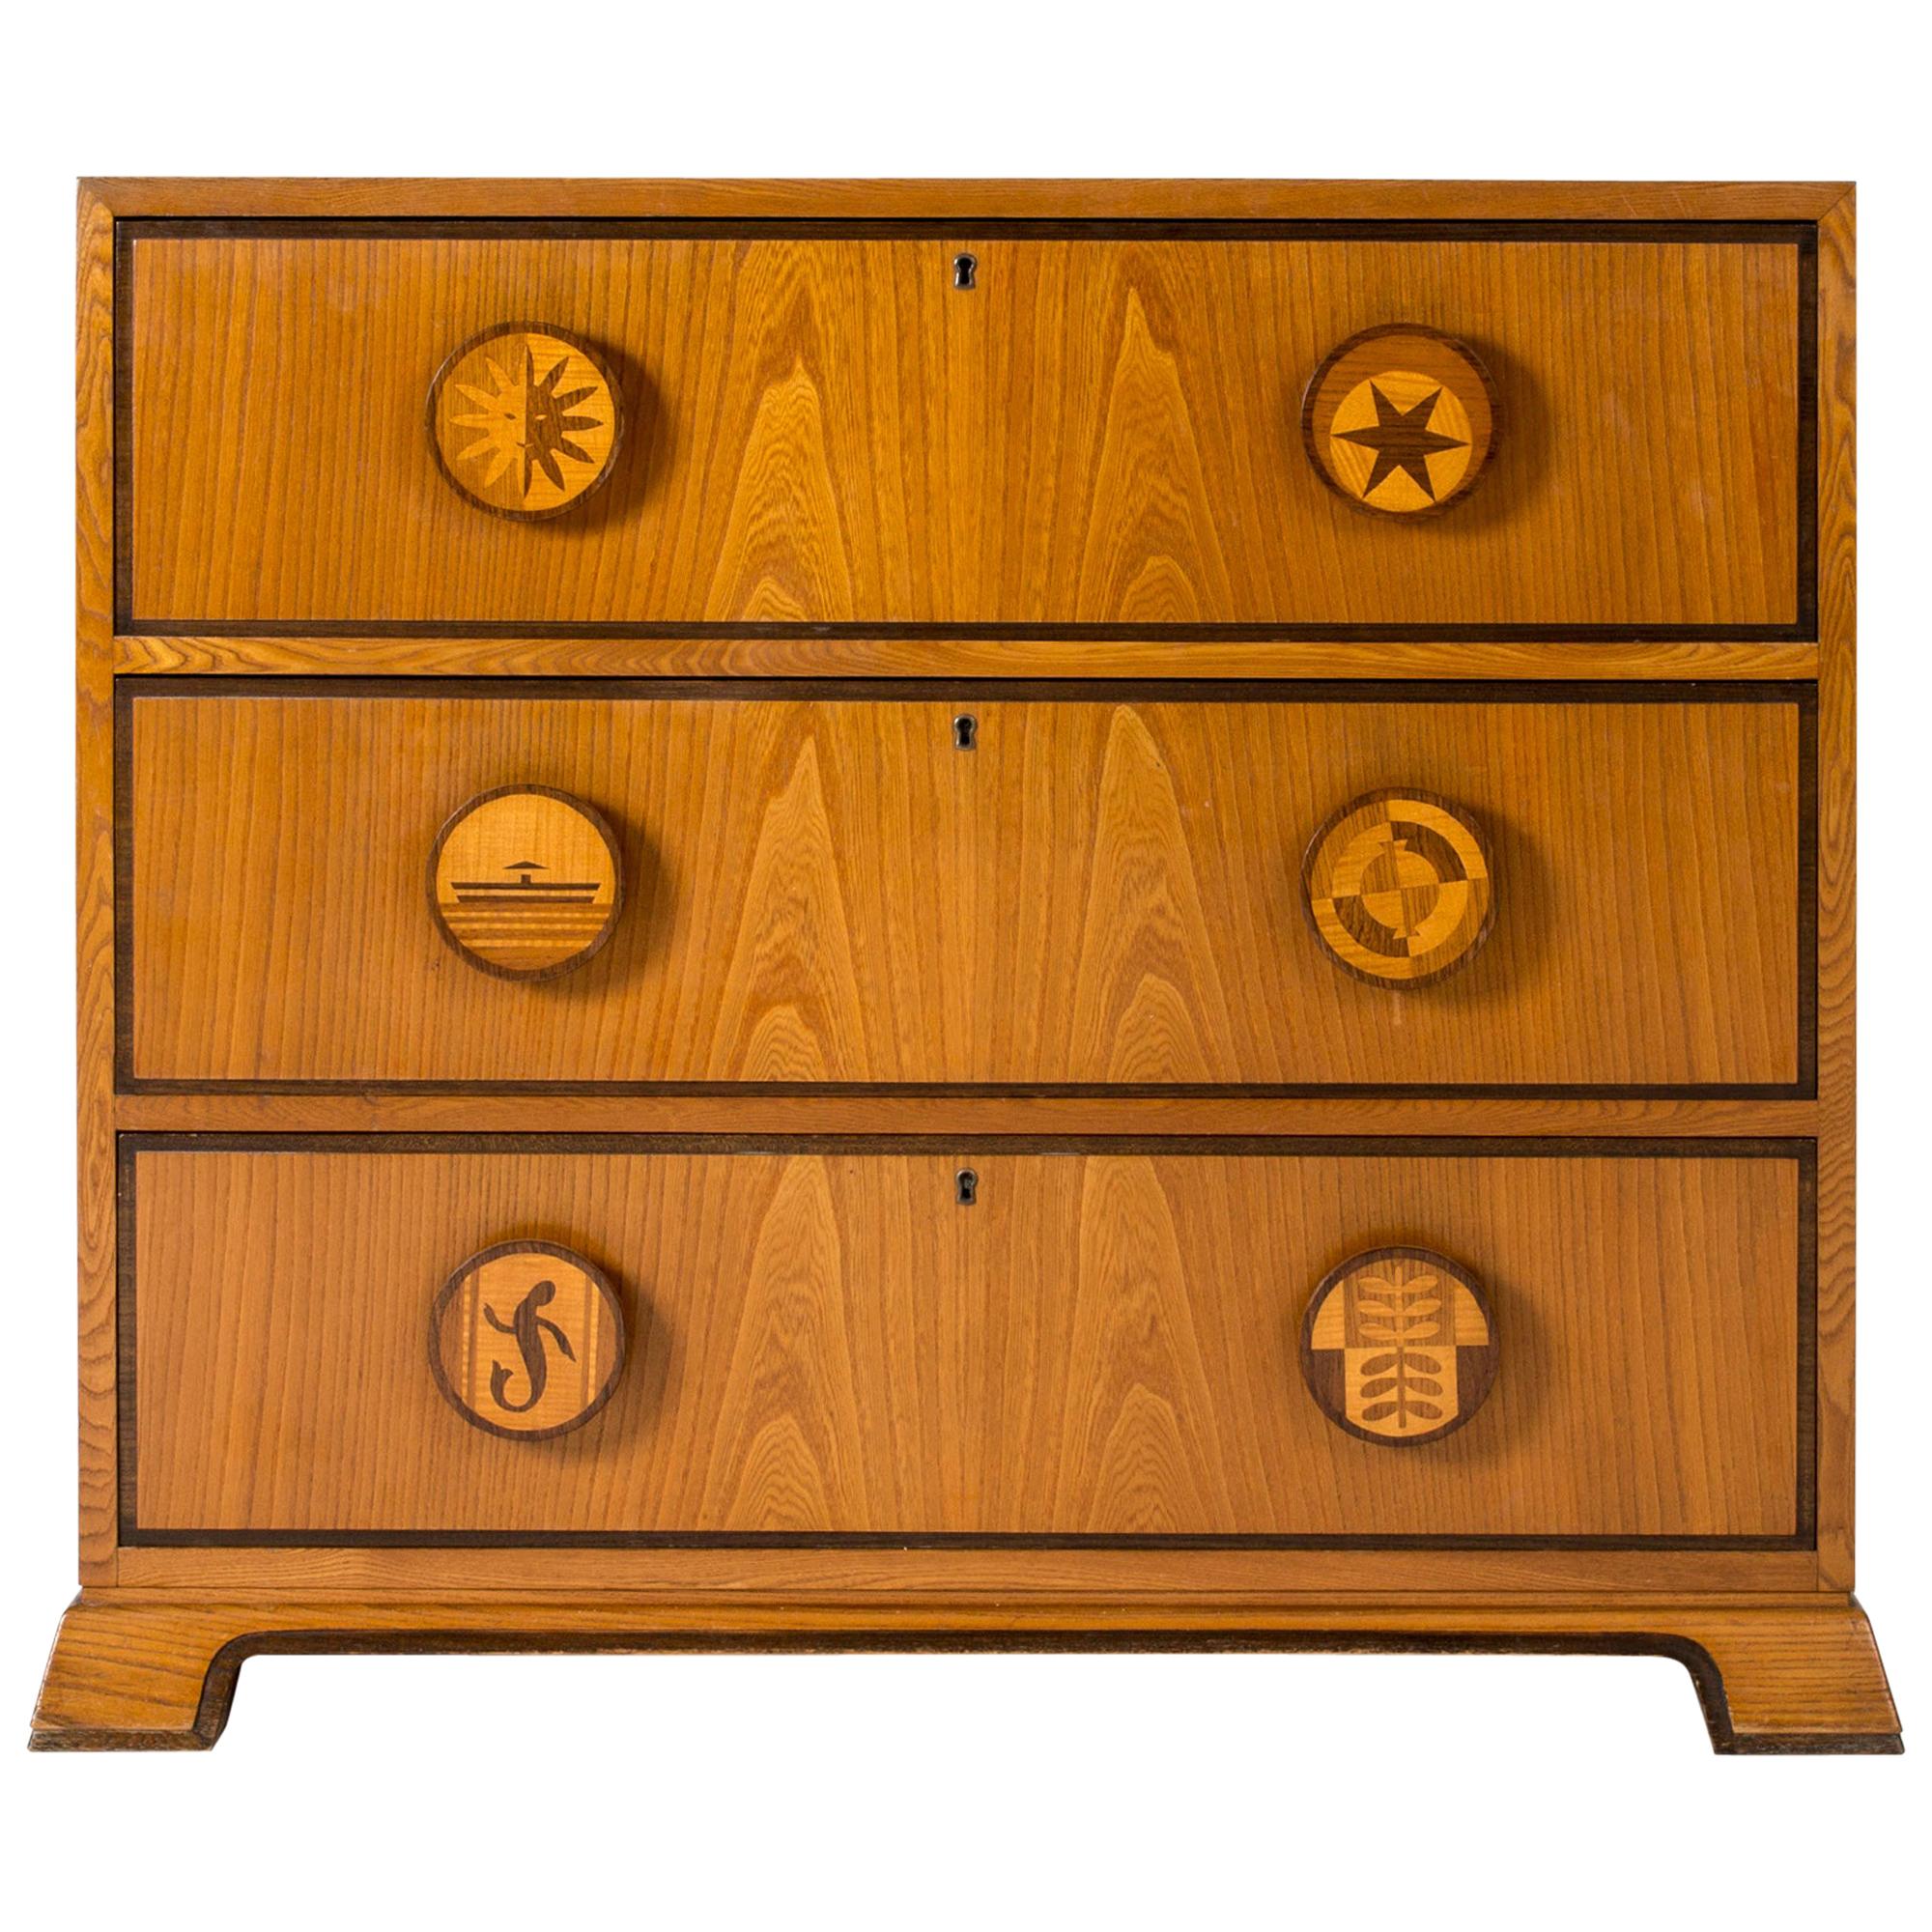 1940s Swedish Modern Chest of Drawers by Otto Schulz for Boet, Sweden